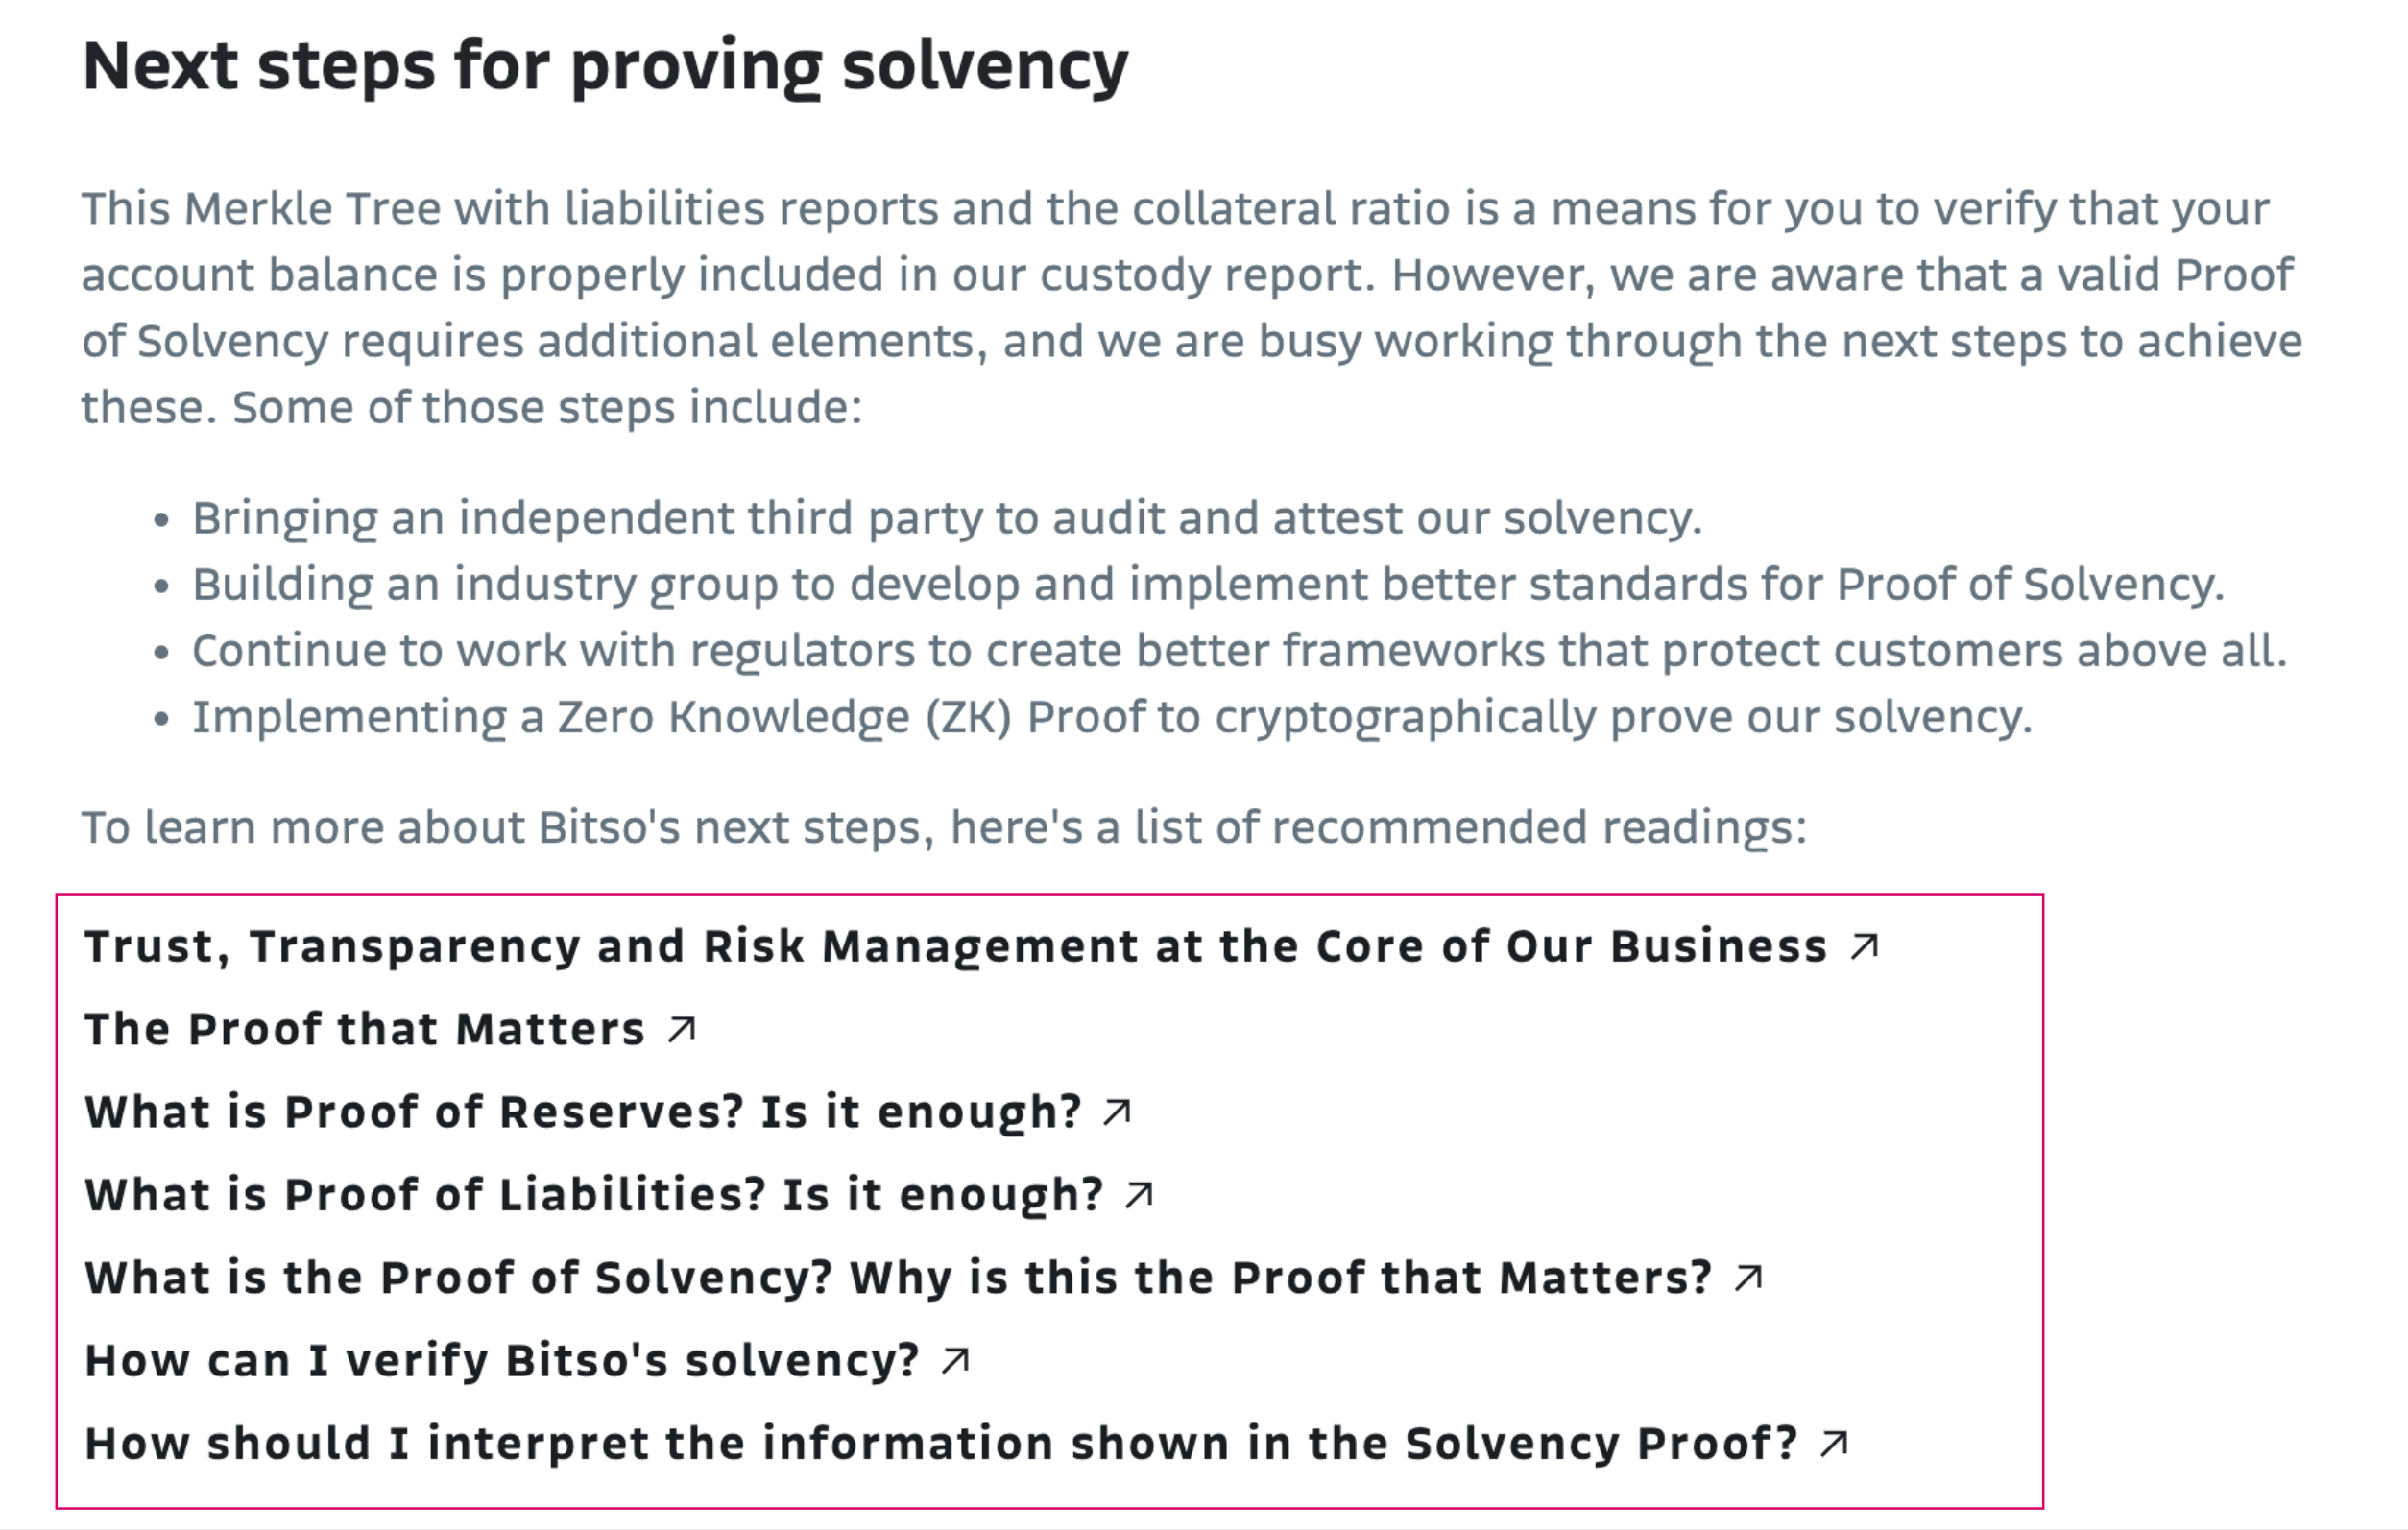 Next_steps___Proof_of_Solvency.png